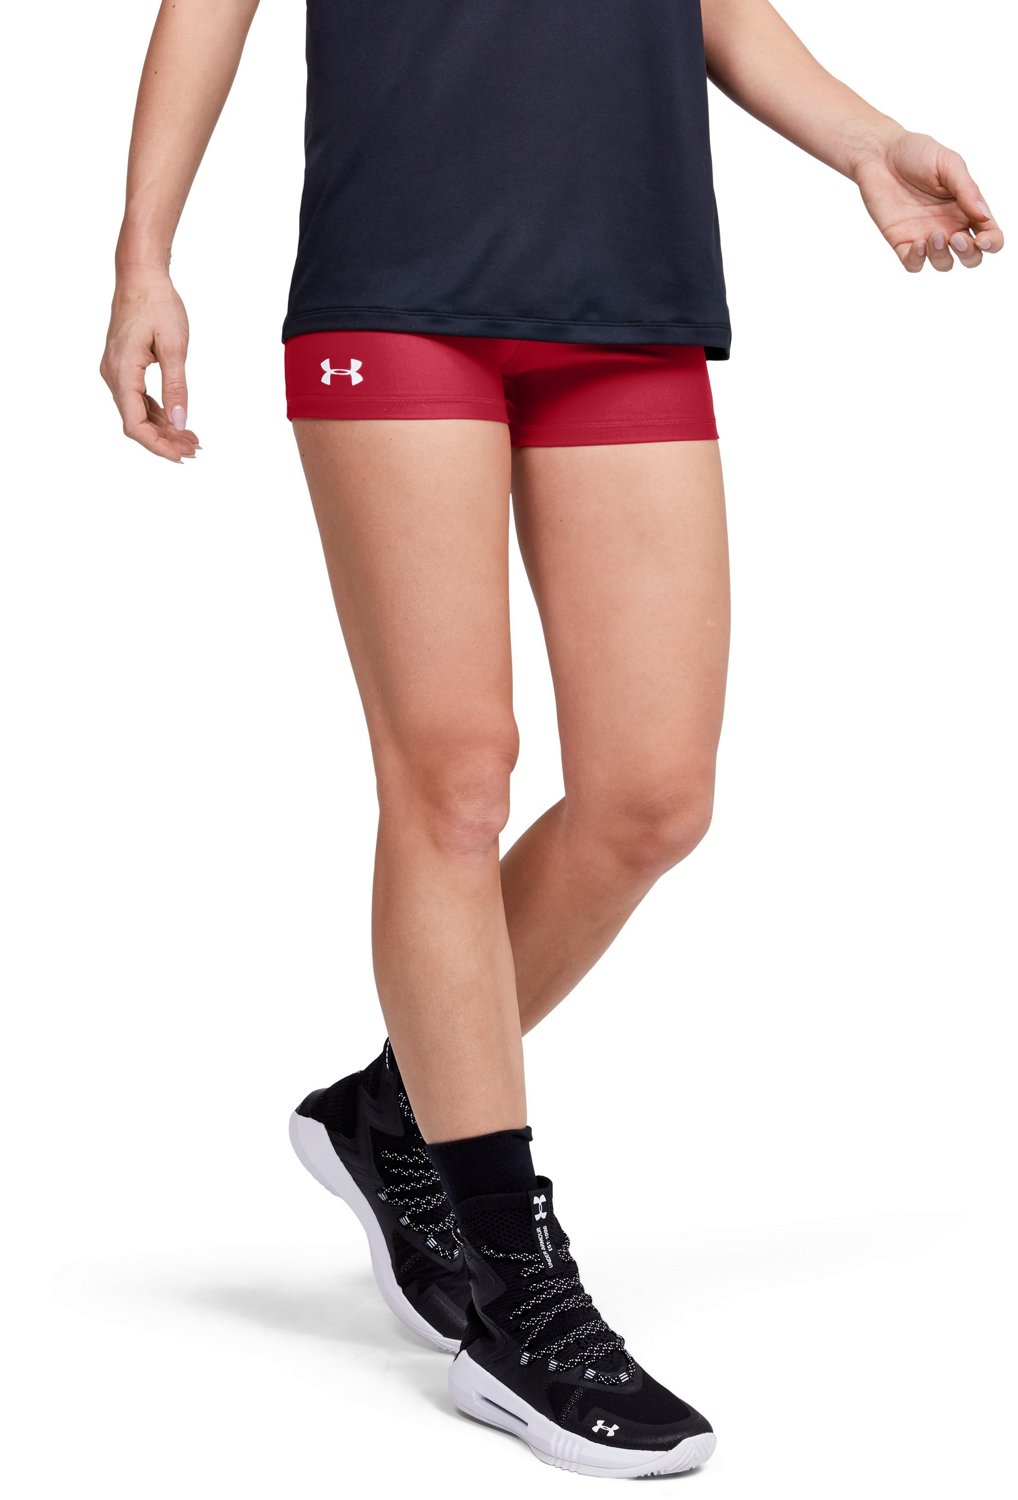 Under Armour Women's On The Court 3 Volleyball Shorts 